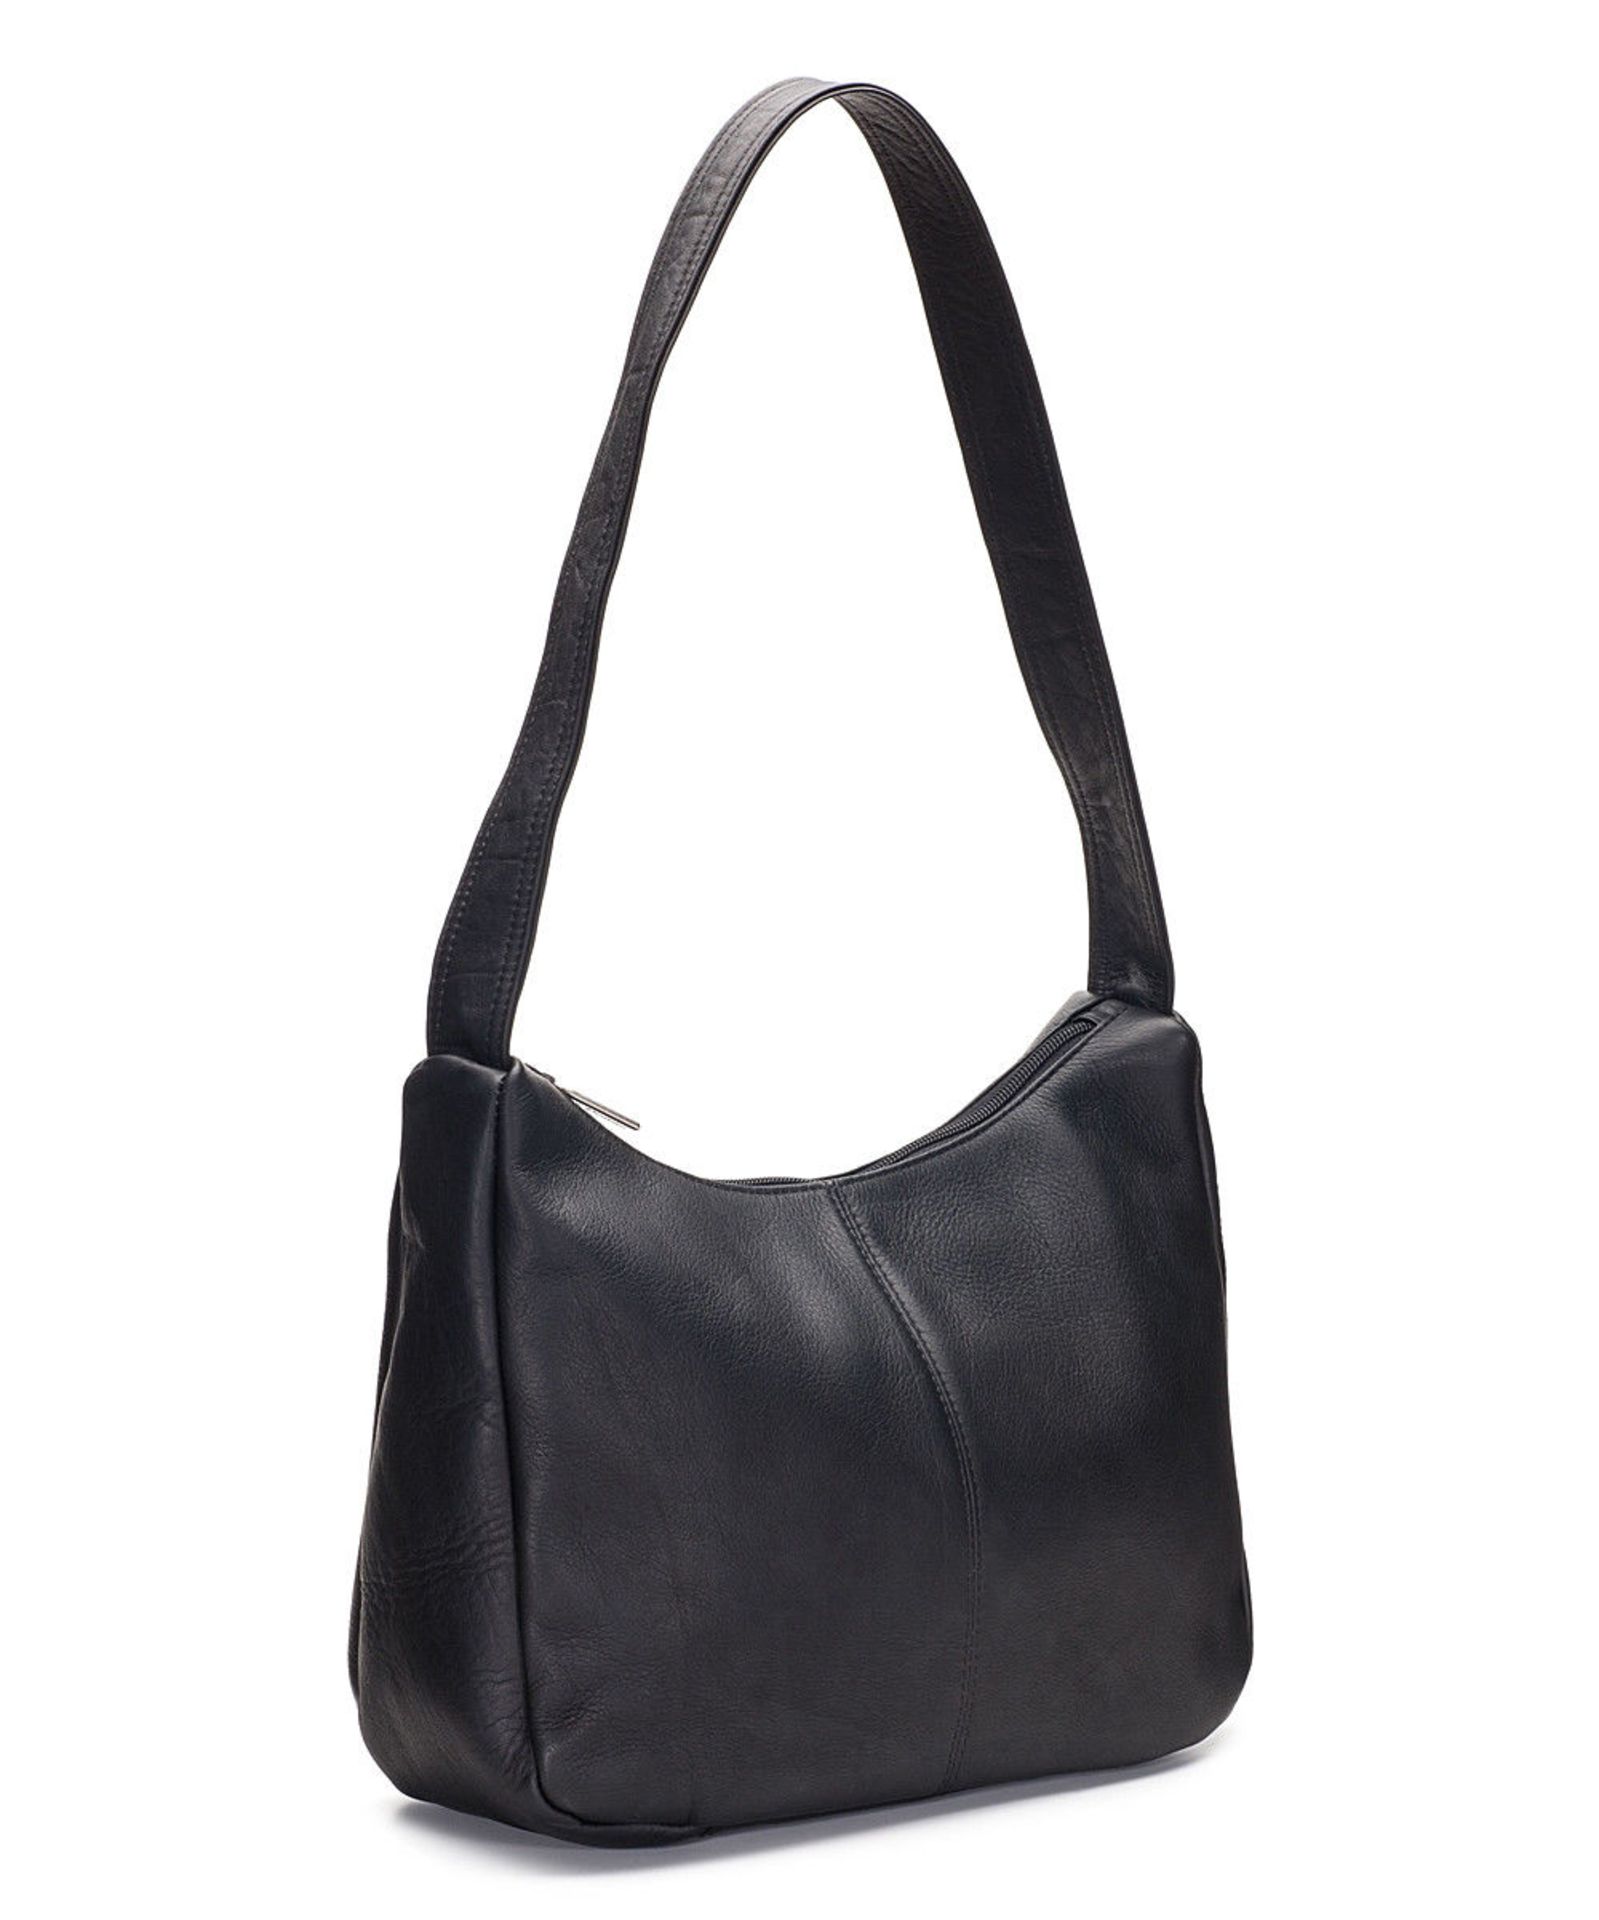 Le Donne Black Leather Hobo (New With Tags) [Ref: 26514605-Mi-Tub 1-Mi]